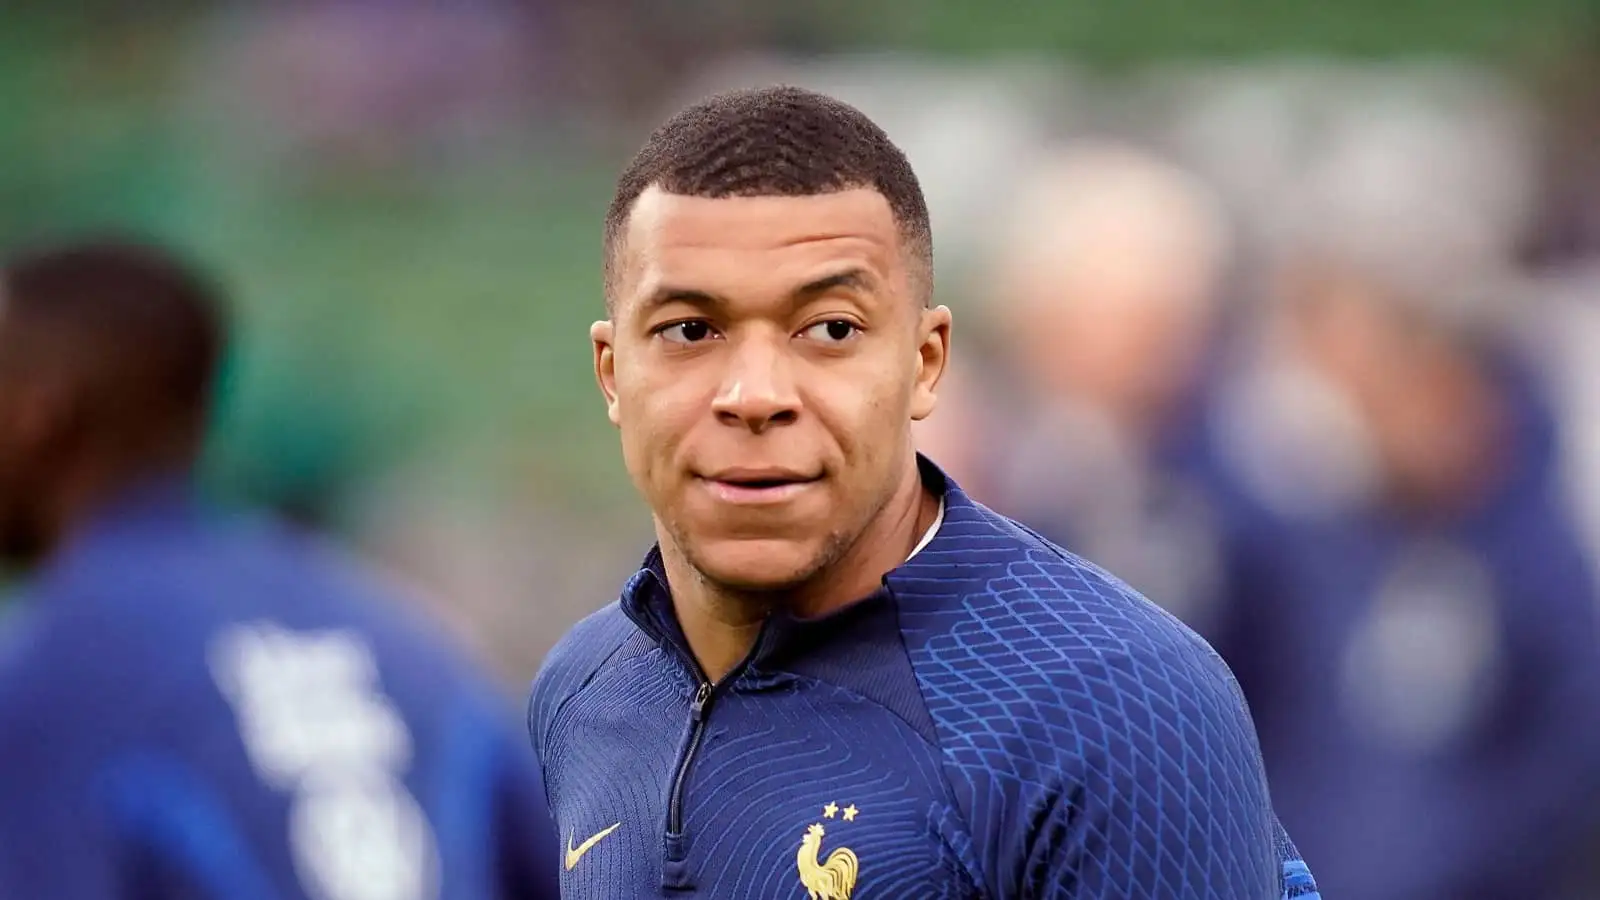 ‘Nothing against Arsenal’ – Gunners told Mbappe is ‘tailor made’ for another side amid transfer links